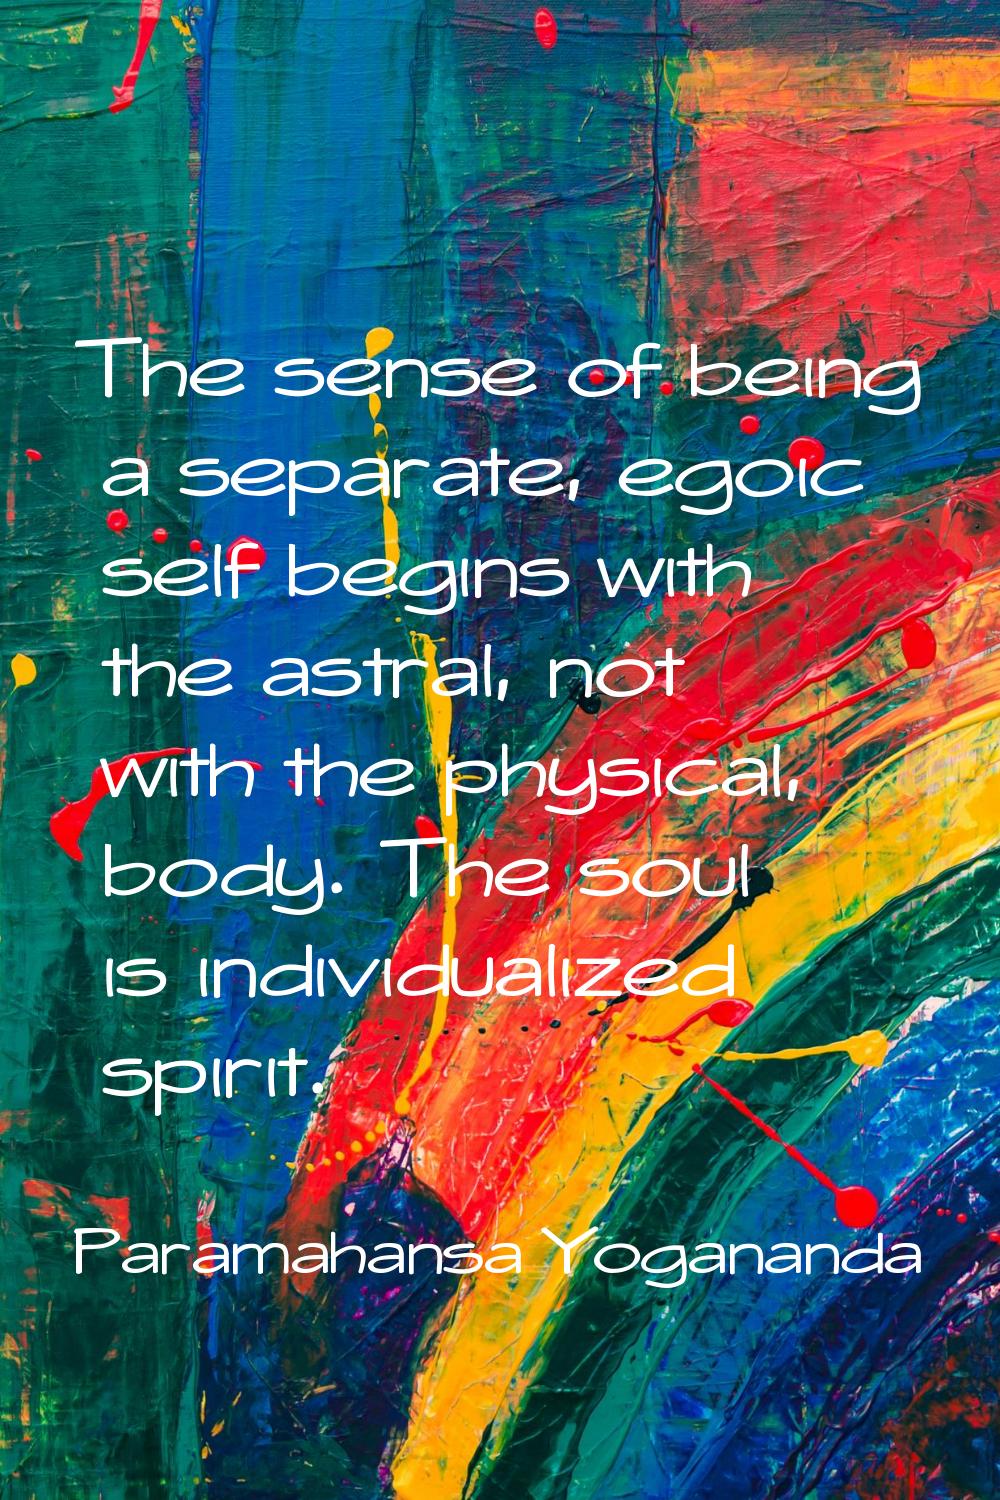 The sense of being a separate, egoic self begins with the astral, not with the physical, body. The 